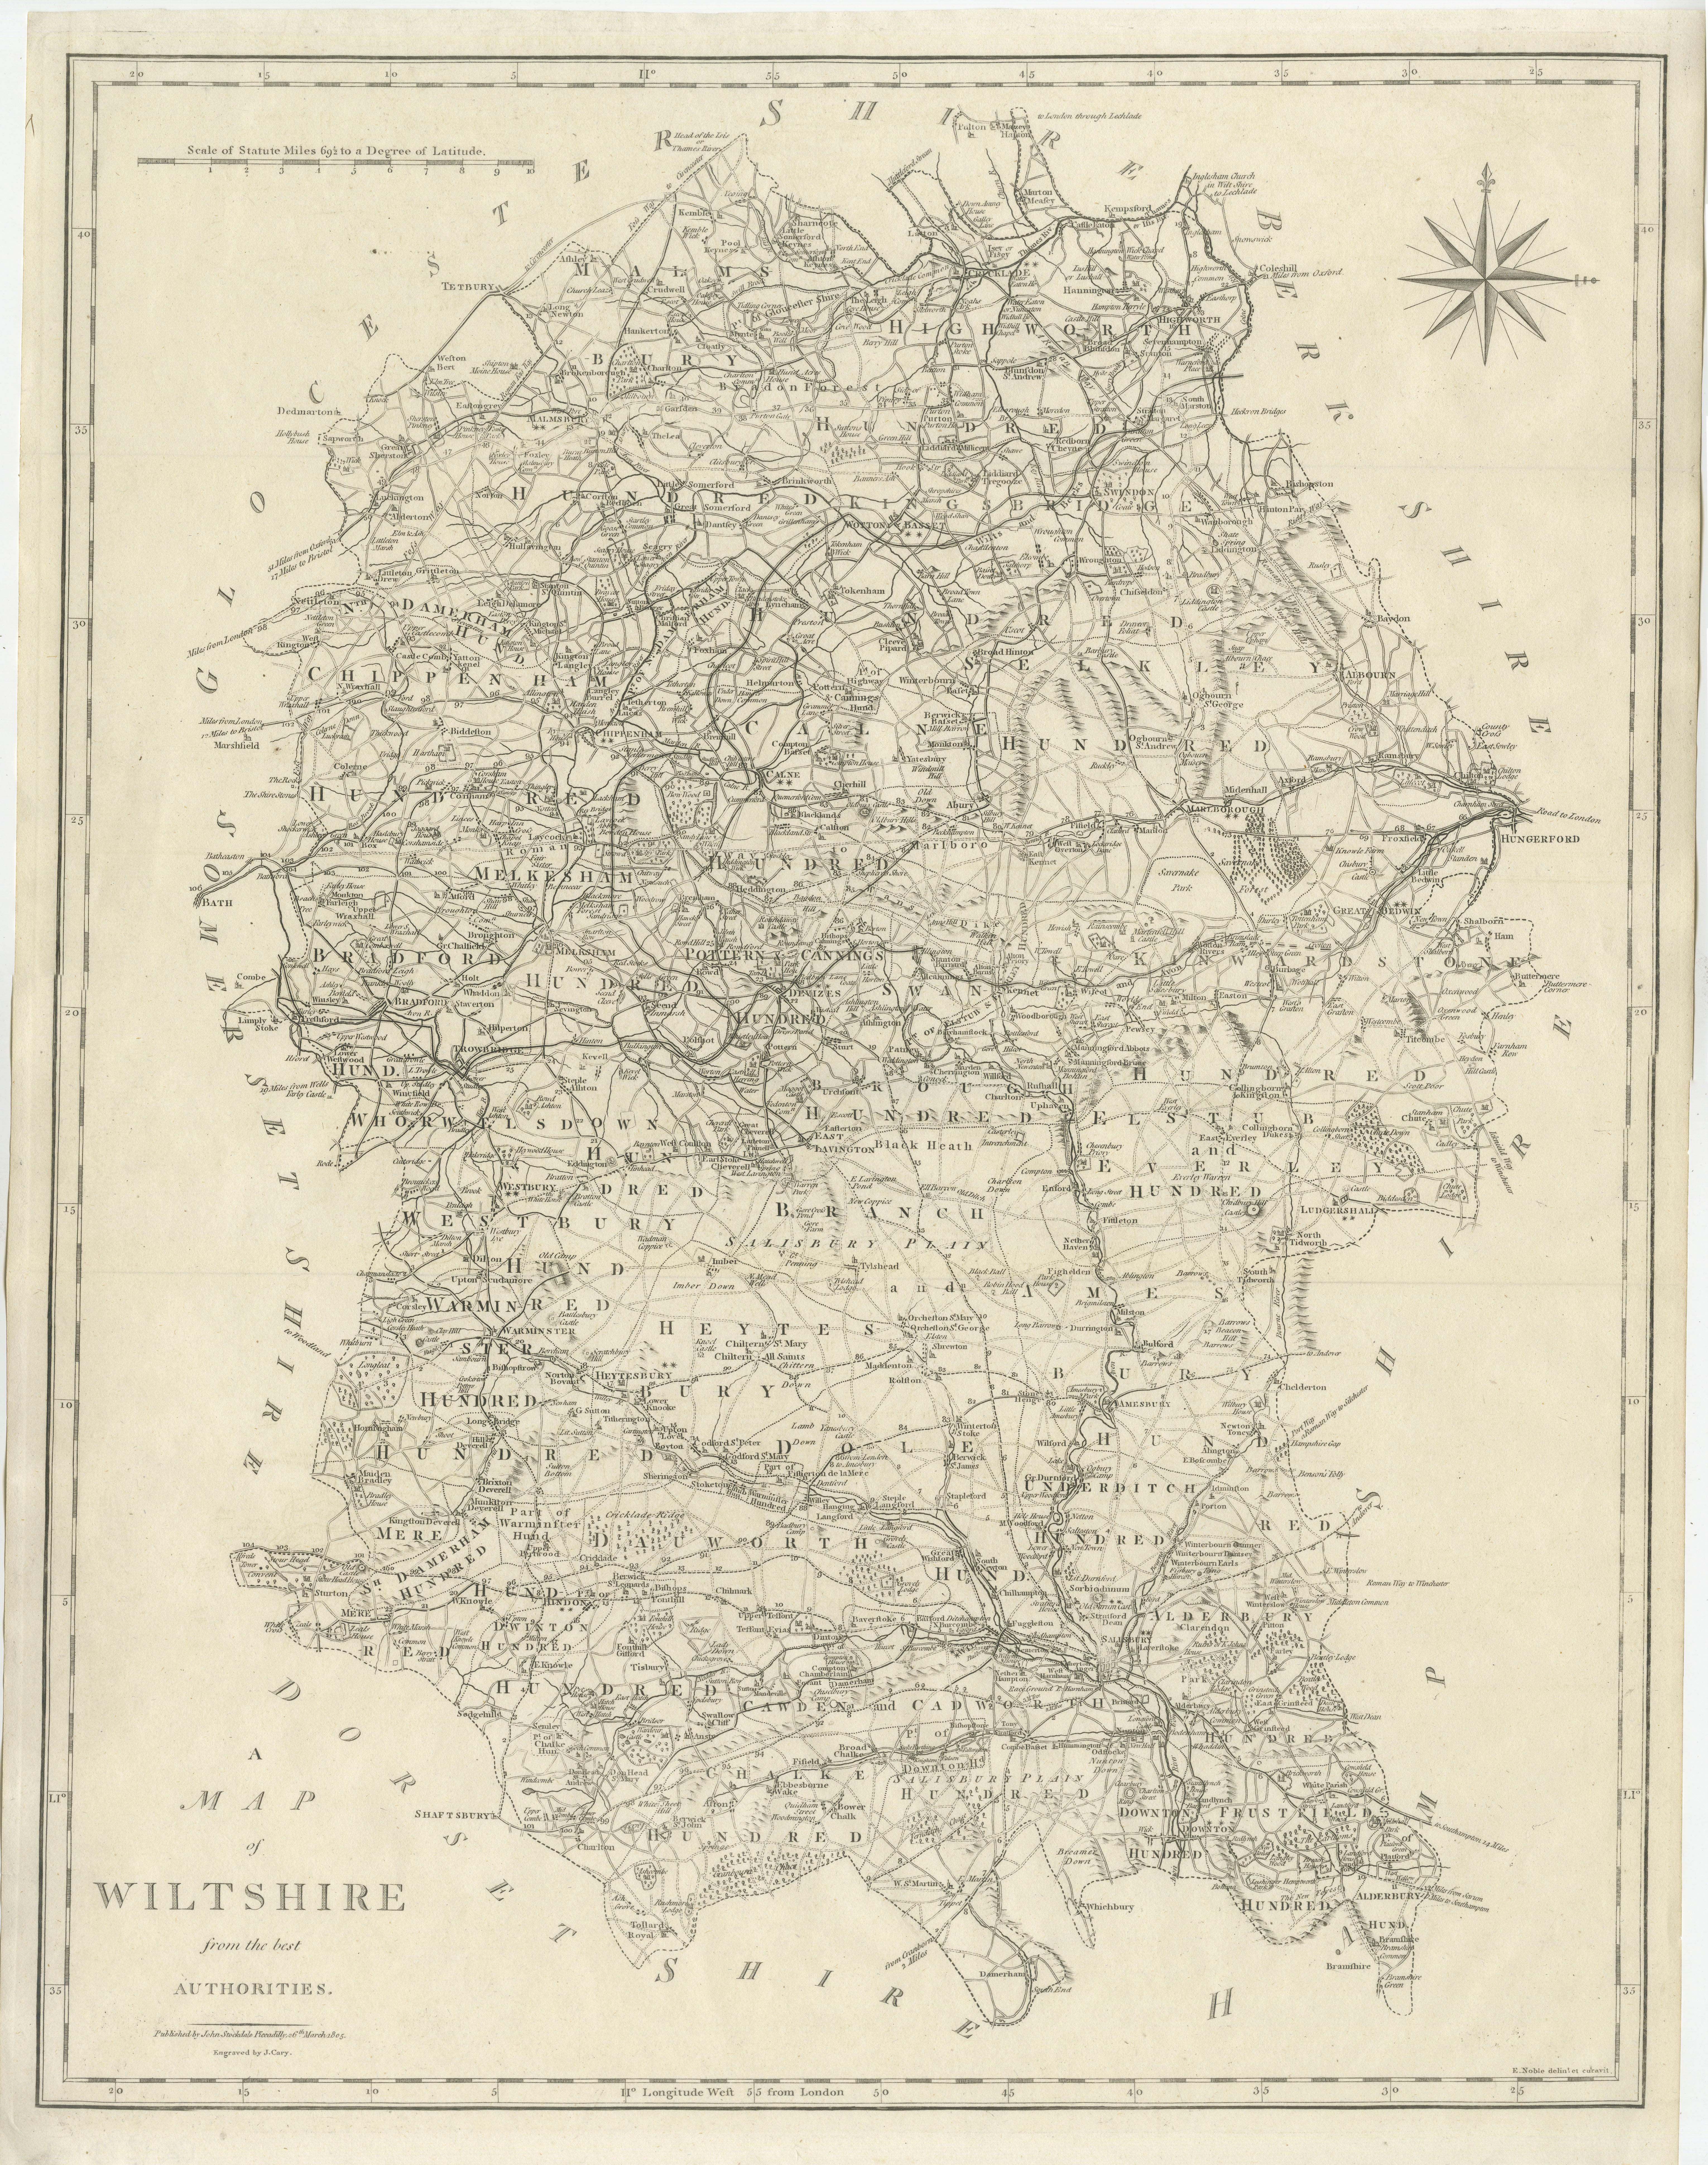 Antique map titled 'A Map of Wiltshire from the best Authorities'. Original old county map of Wiltshire, England. Engraved by John Cary. Originates from 'New British Atlas' by John Stockdale, published 1805. 

John Cary (1755-1835) was a British